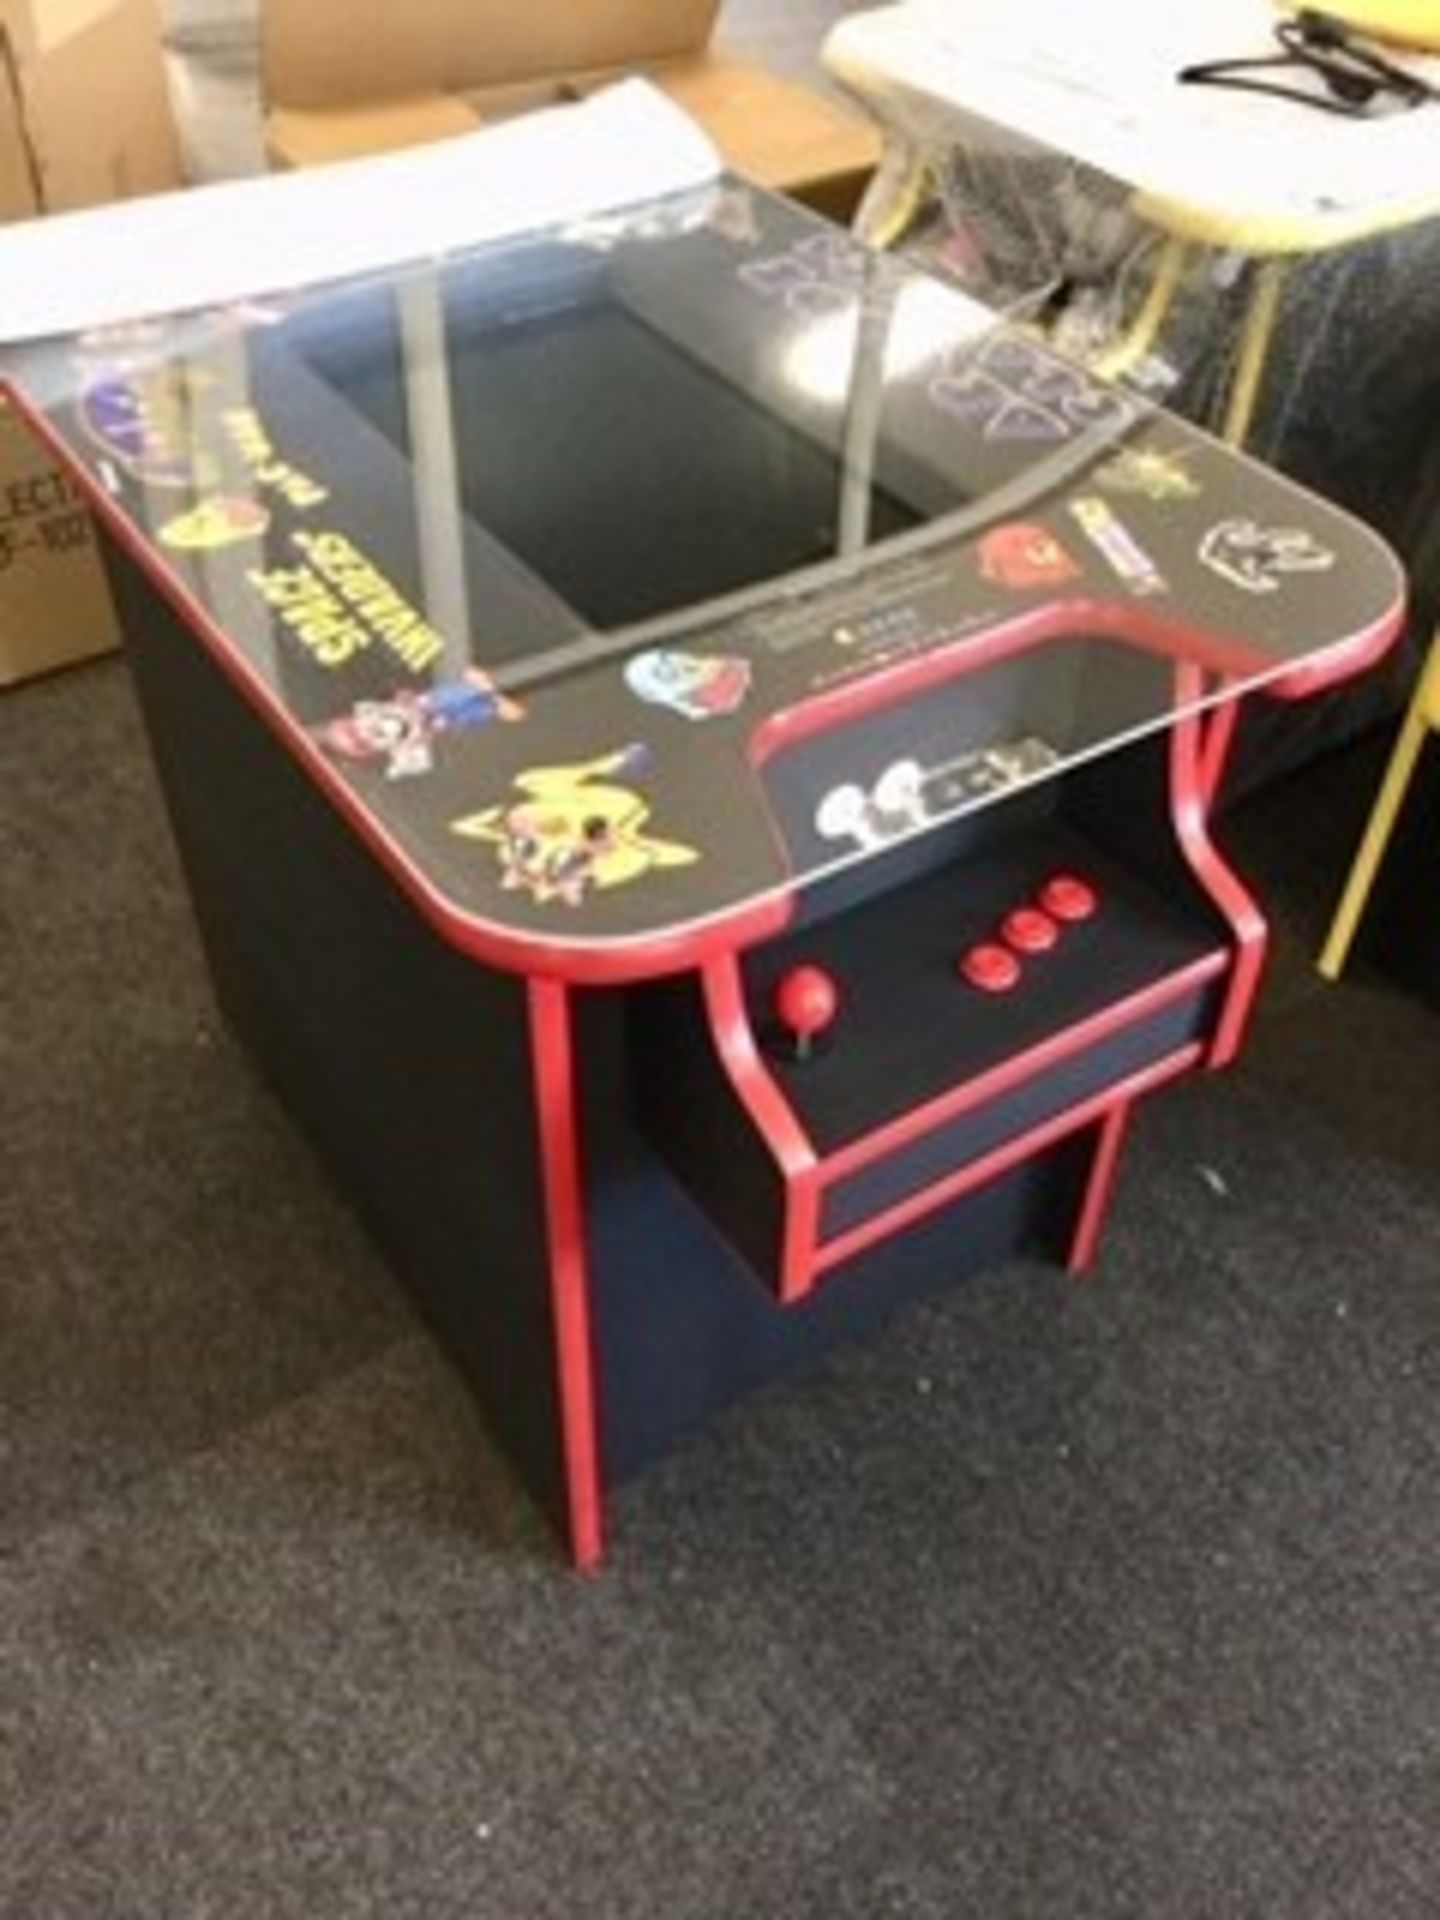 Brand New Space Invaders Machine with 60 Classic Arcade Games Installed – PAC-Man, Donkey Kong